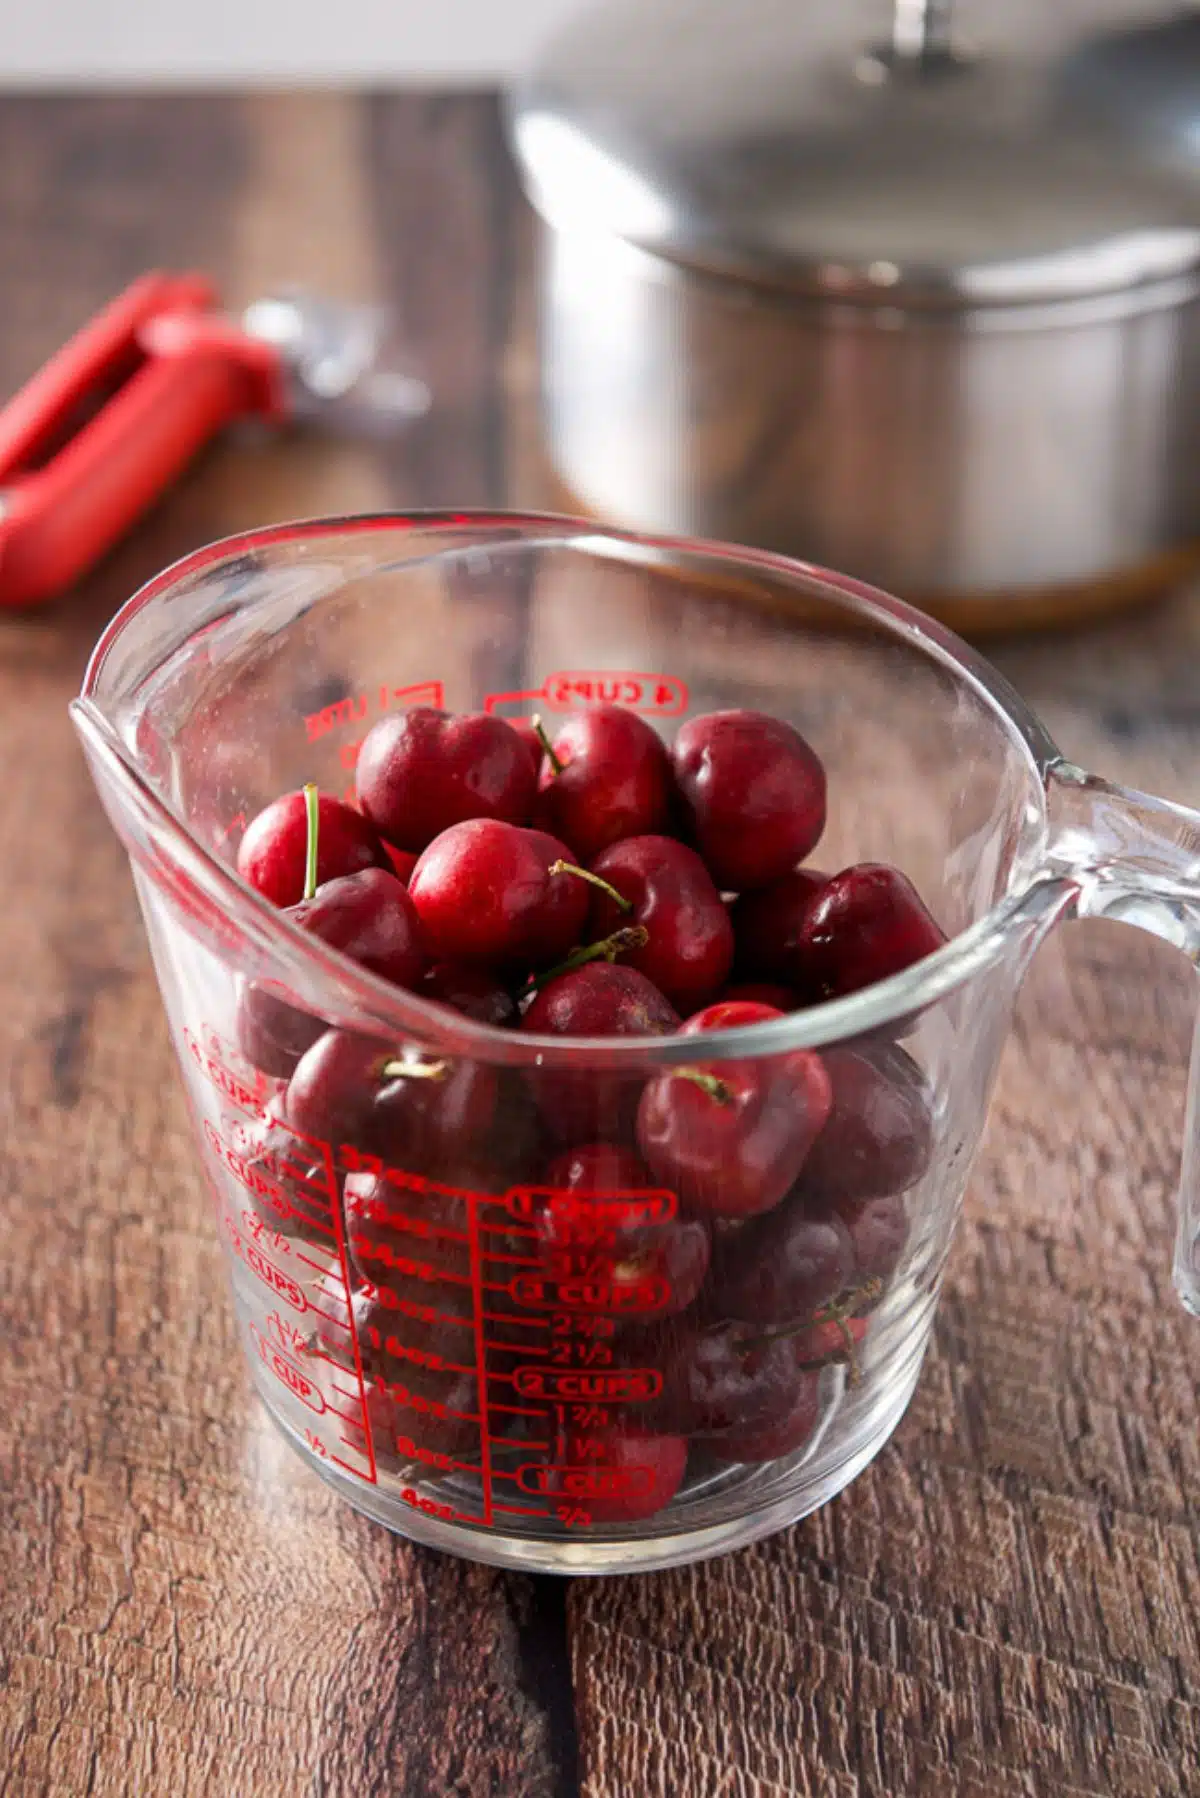 Cherries in a two cup measuring glass with a pitter and pan in the background